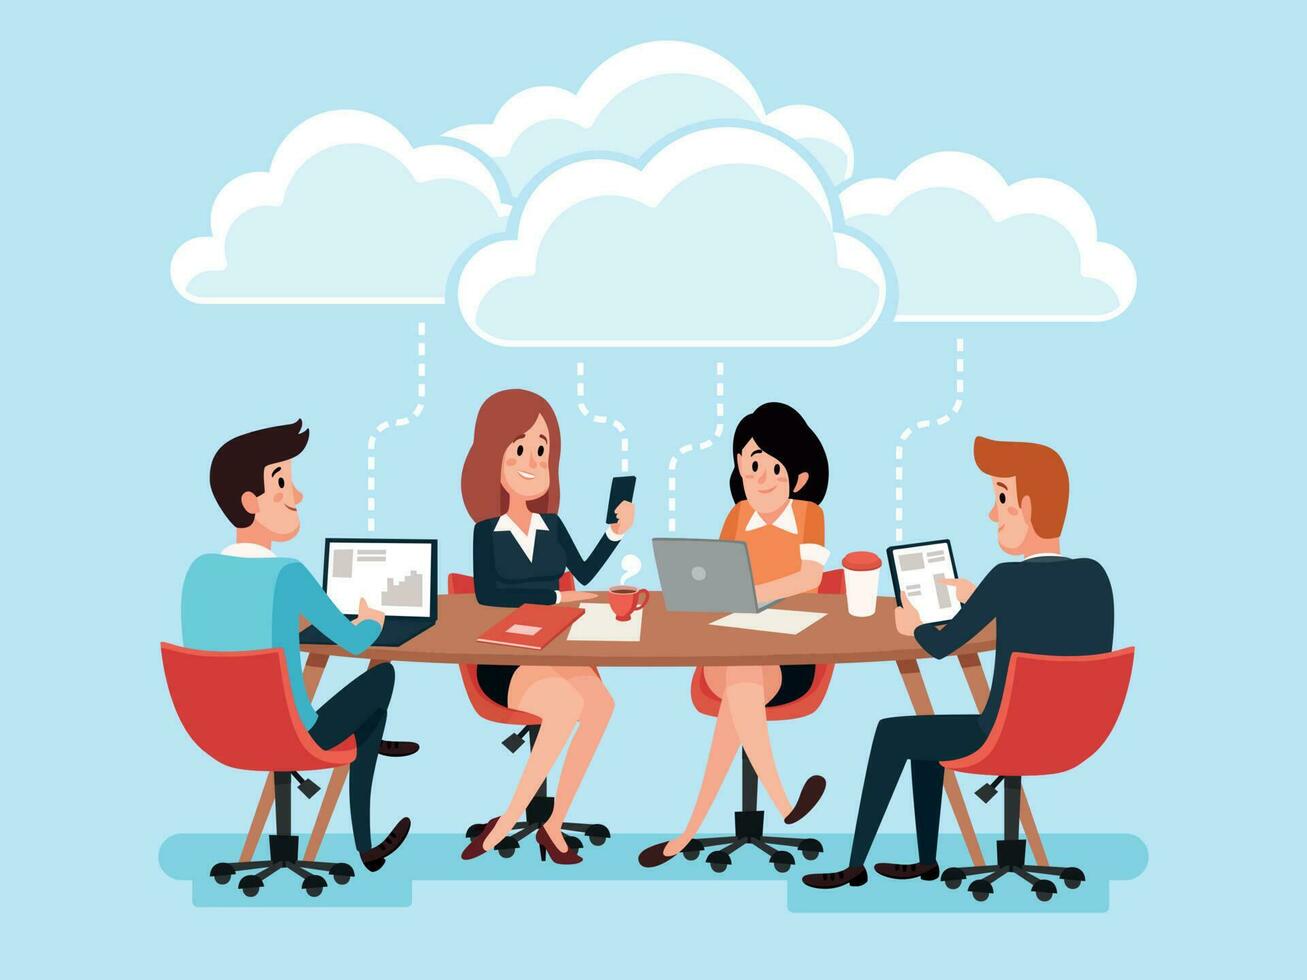 Business team using laptops, business people sharing office documents, chat virtual conference on cloud technology cartoon vector characters